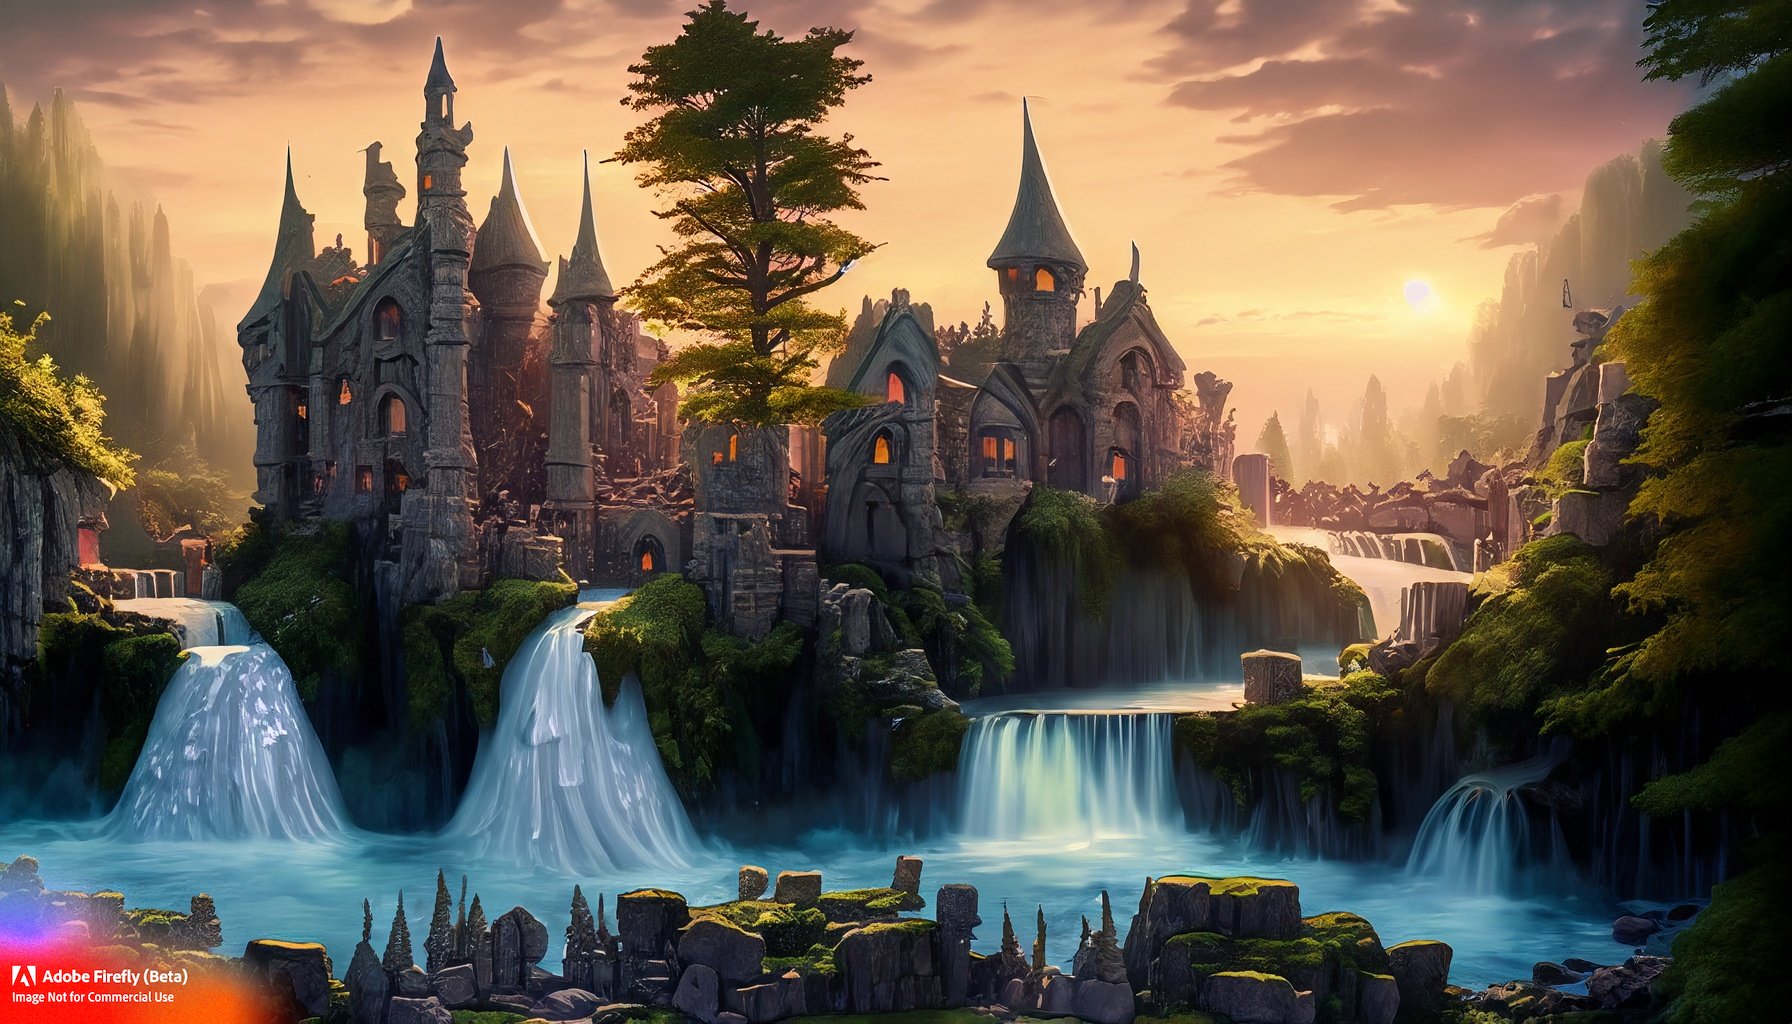 Firefly_a+fae woodland kingdom made of stone buildings on top of waterfalls, surrounded by evergreen trees, at sunset_art,wide_angle_44916.jpg